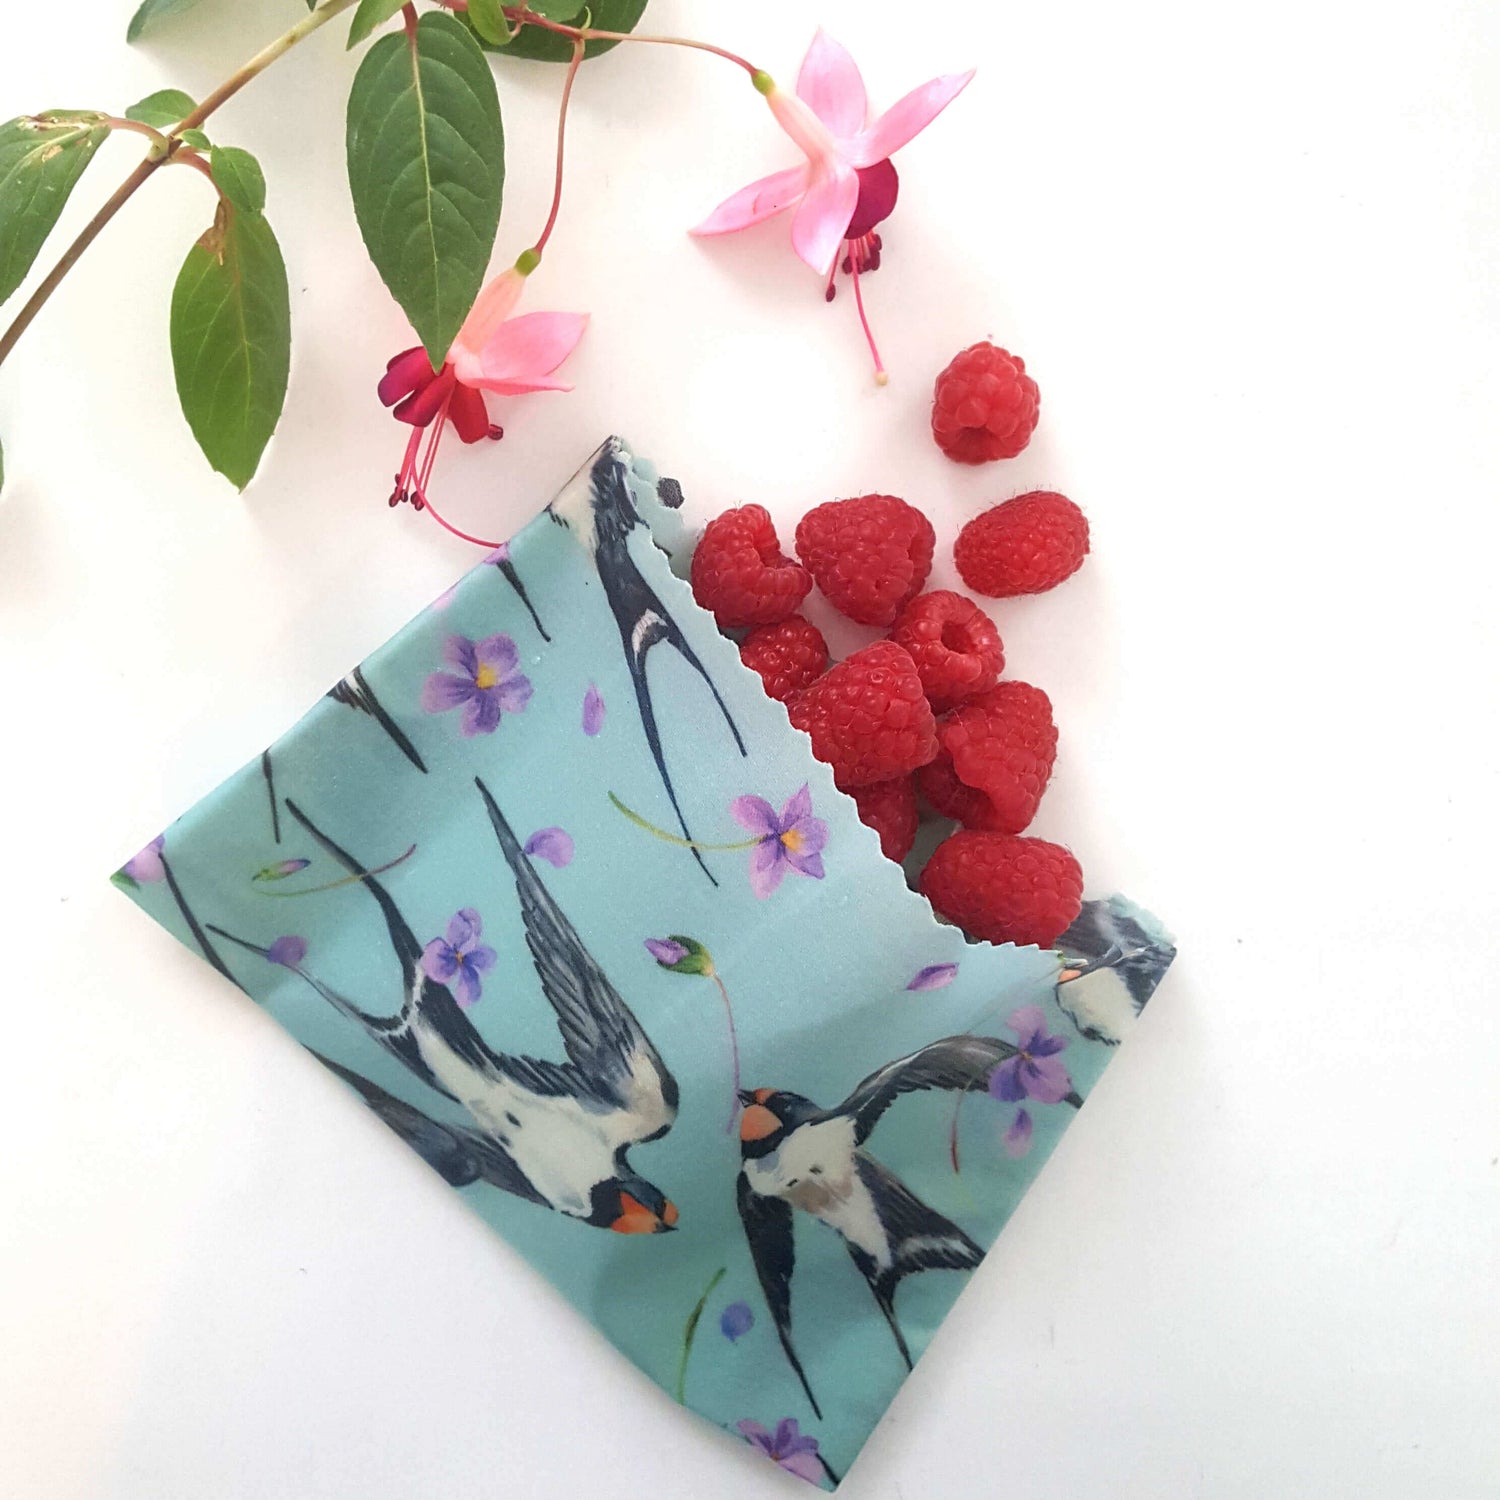 Reusable Beeswax Food Wraps 100% Hand Made in the UK with Love shown in the Autumn Swifts collection for Christmas. Folded as a snack bag.